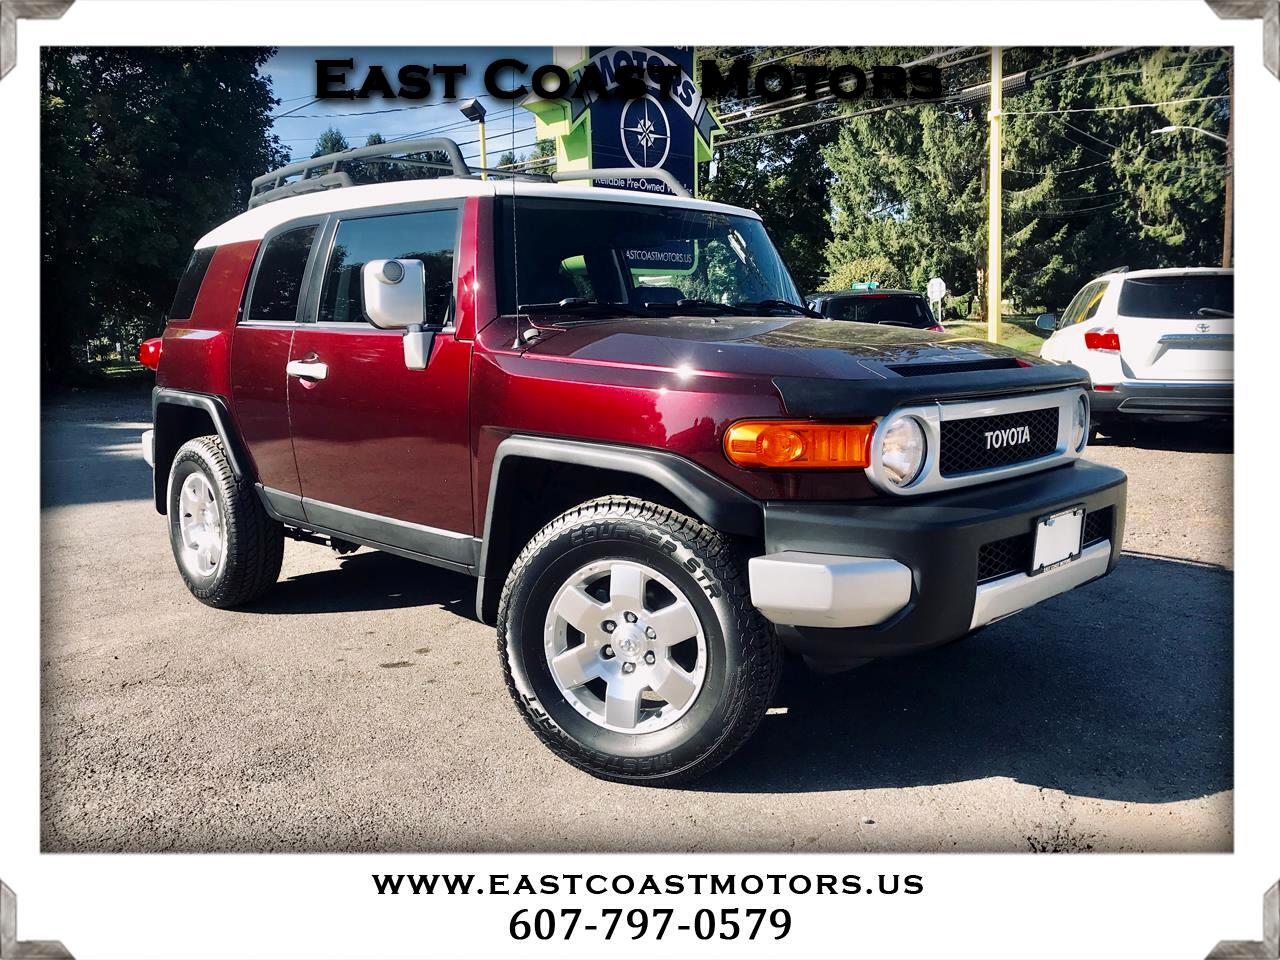 Used 2007 Toyota Fj Cruiser 4wd At For Sale In Binghamton Ny 13901